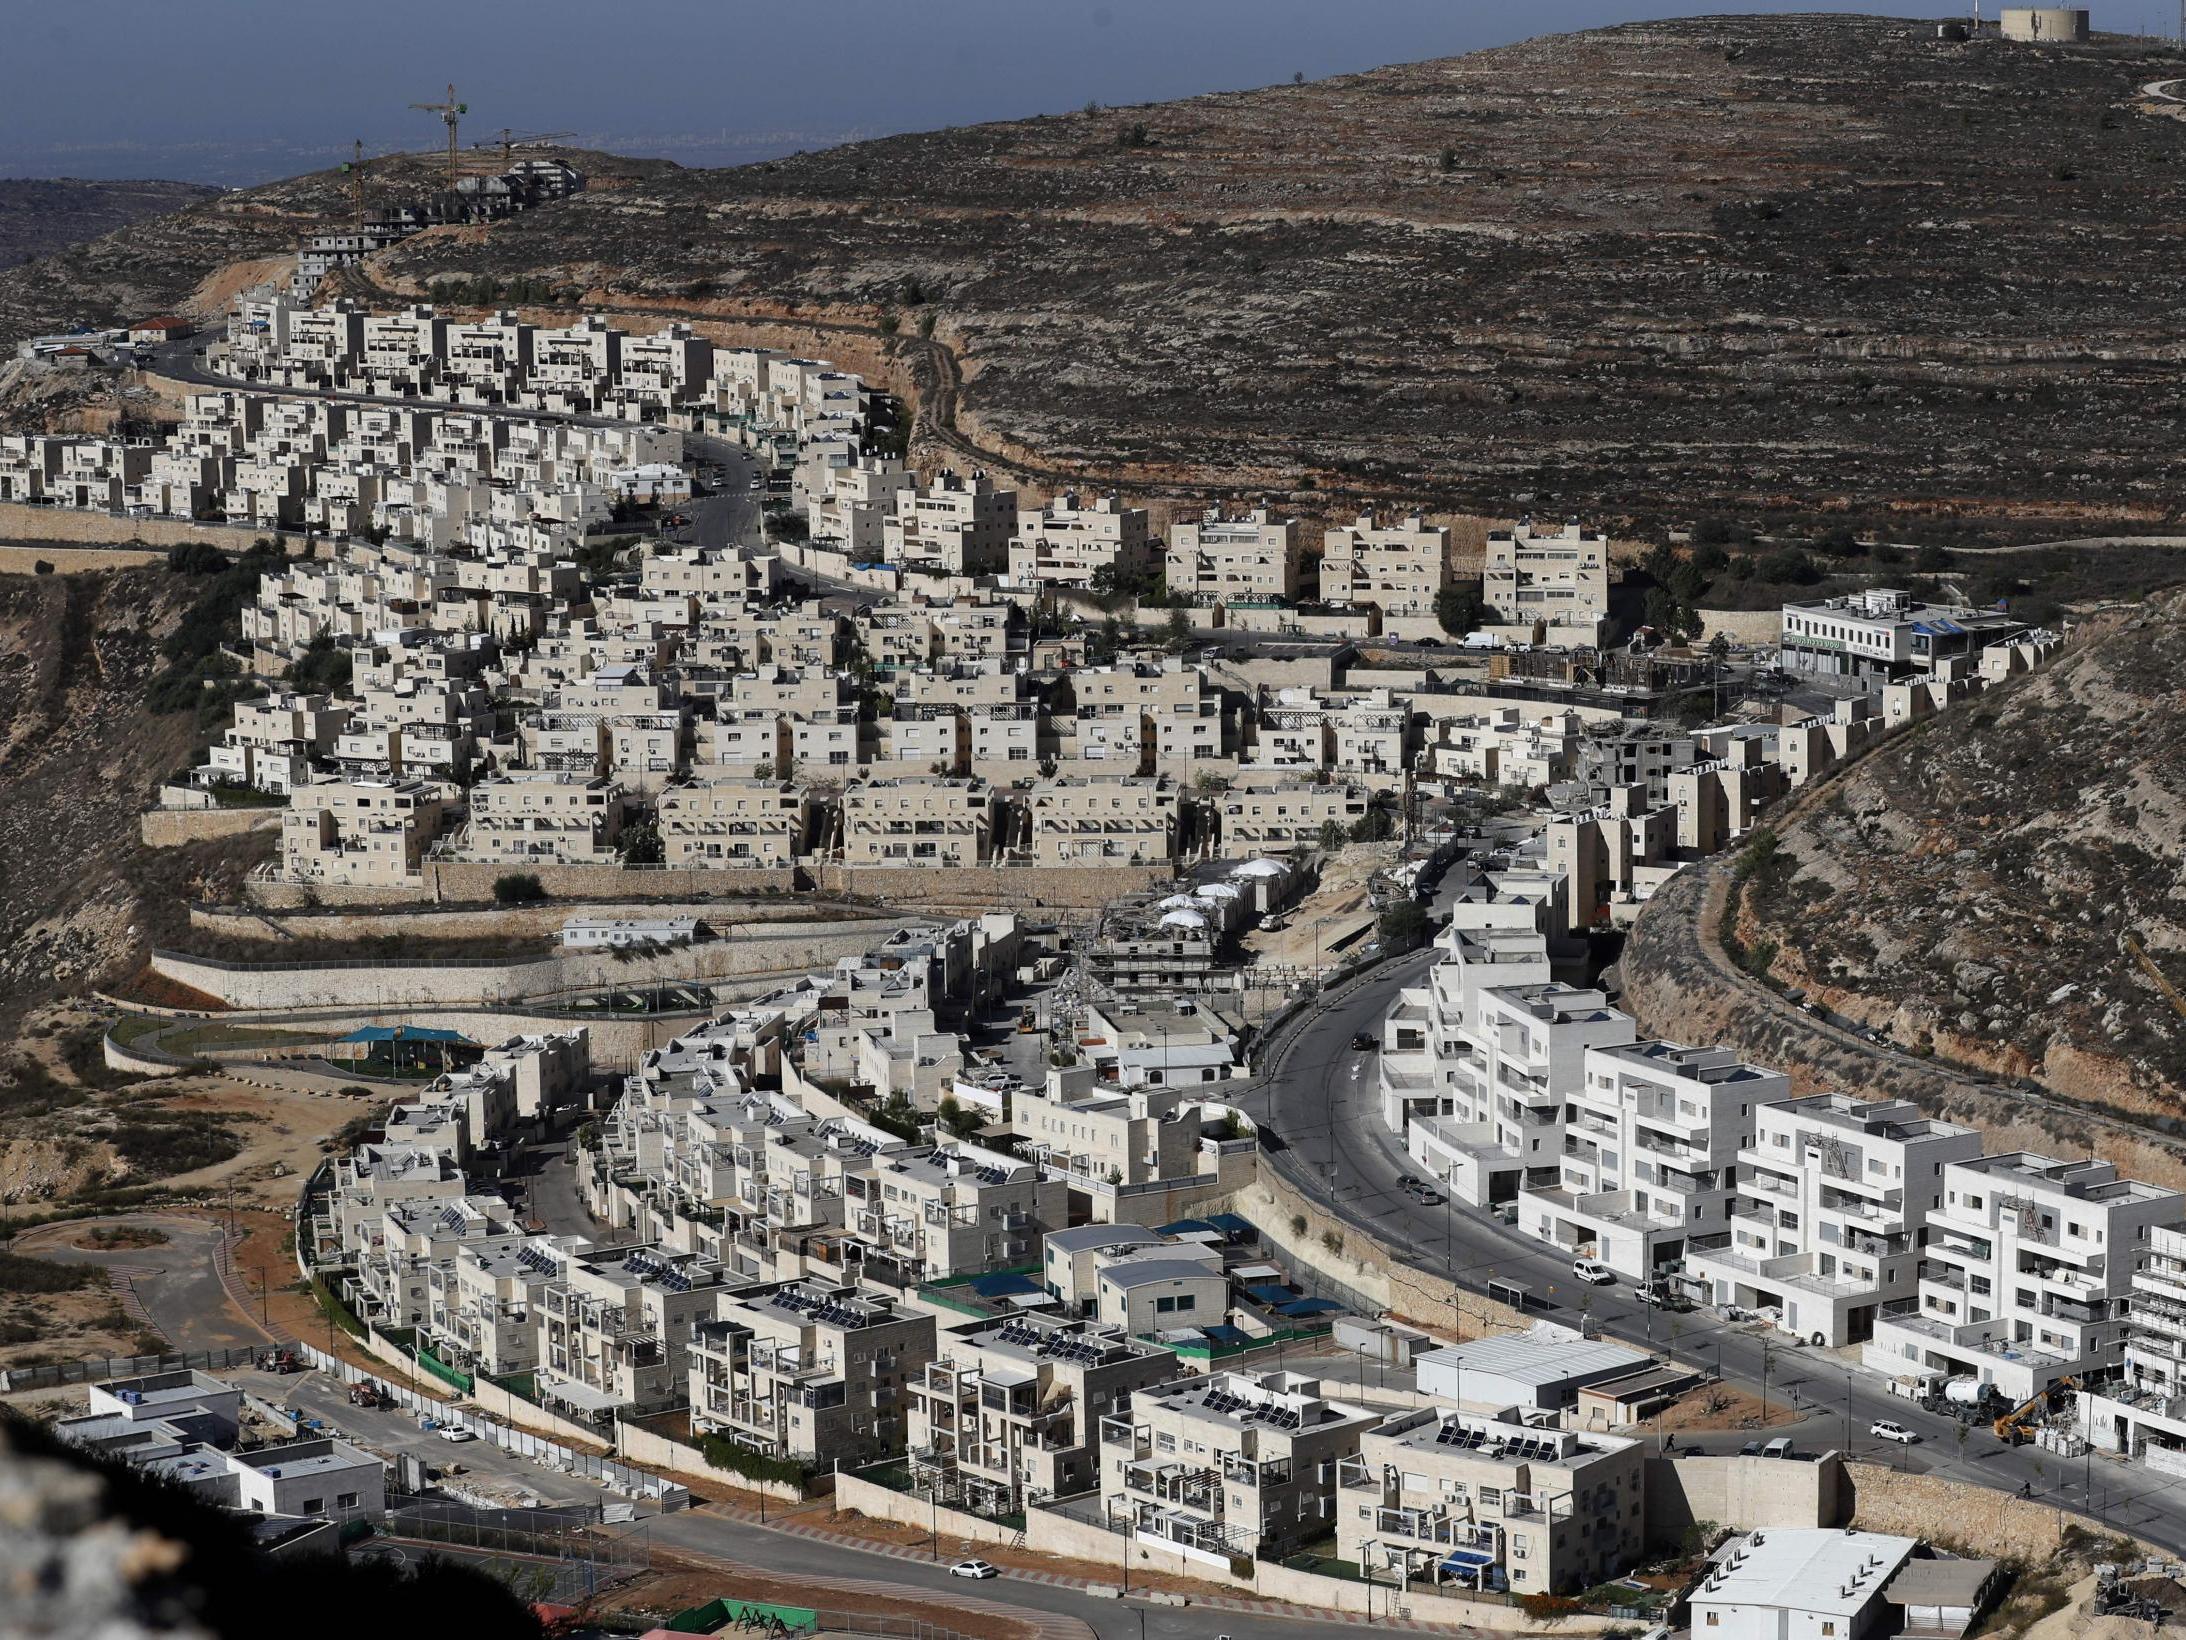 A view of the Israeli settlement of Givat Zeev, near the Palestinian city of Ramallah in the occupied West Bank (AFP/Getty)